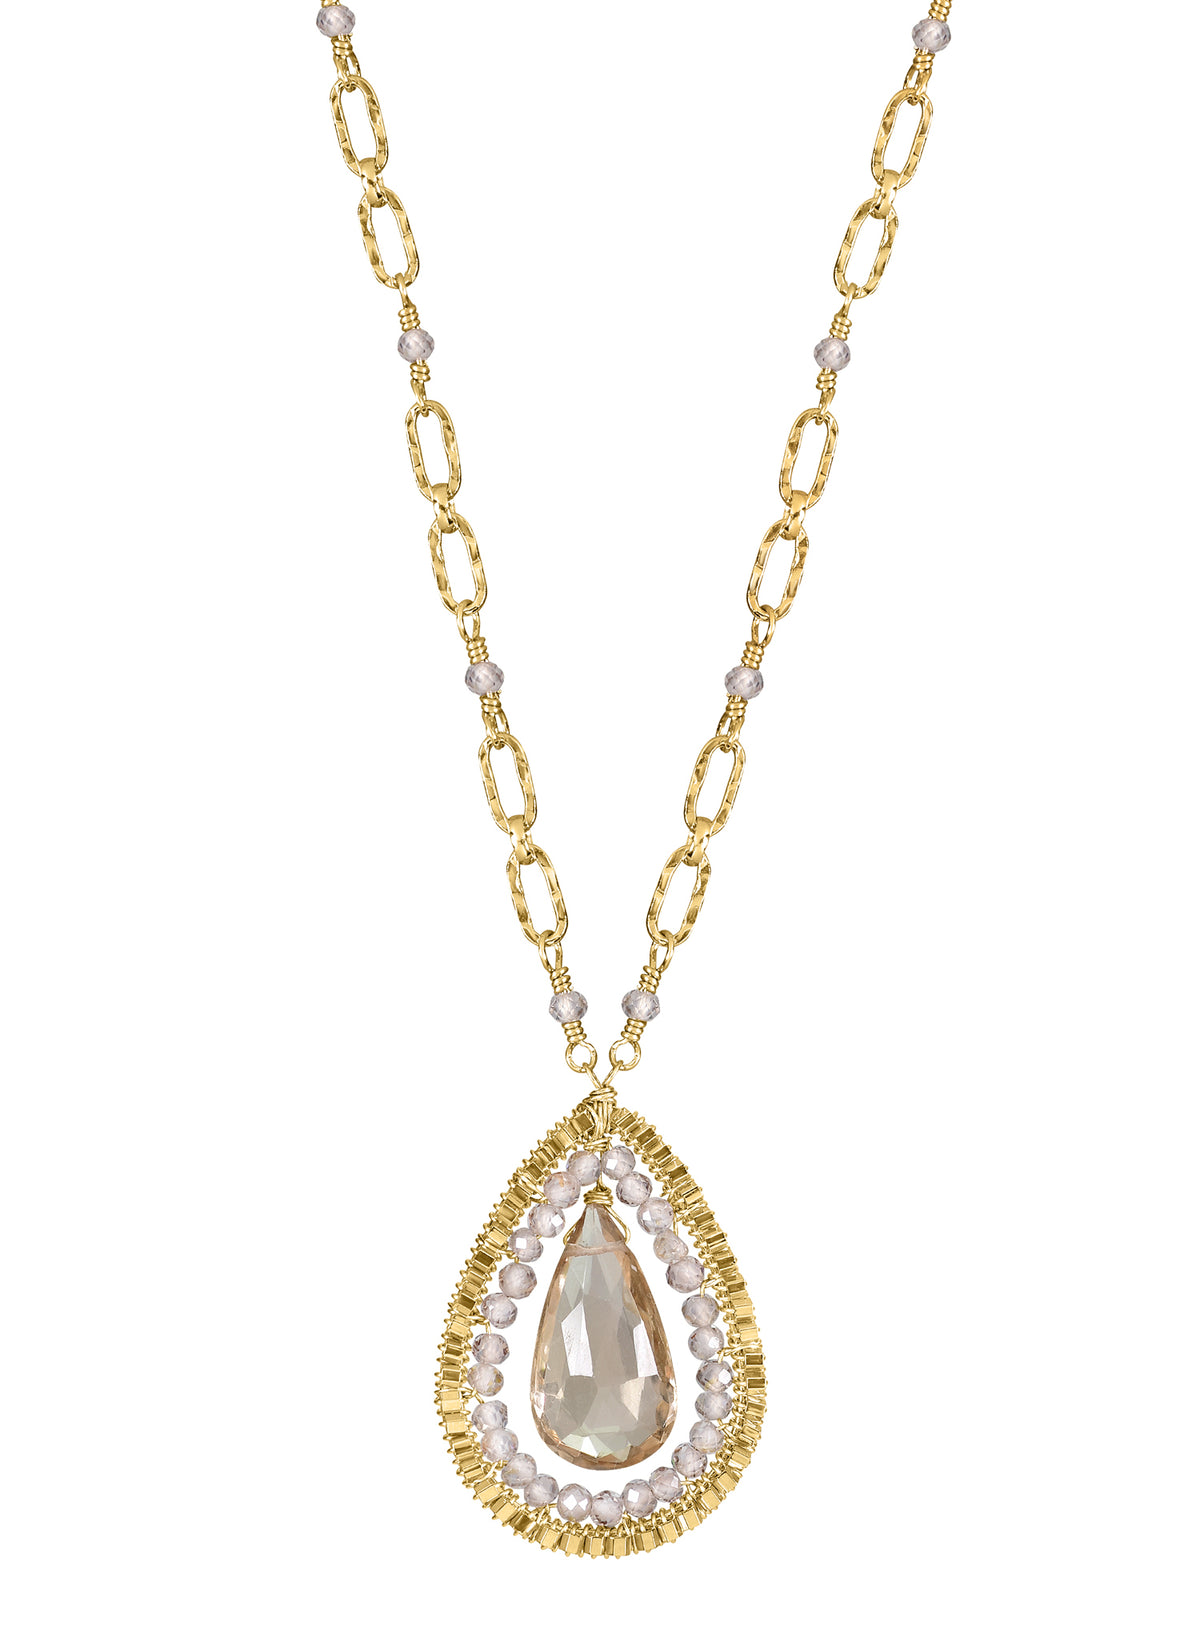 Champagne citrine Brown zircon Seed beads 14k gold fill Necklace measures 17-7/8&quot; in length Pendant measures 1&quot; in length and 3/4&quot; in width at the widest point Handmade in our Los Angeles studio